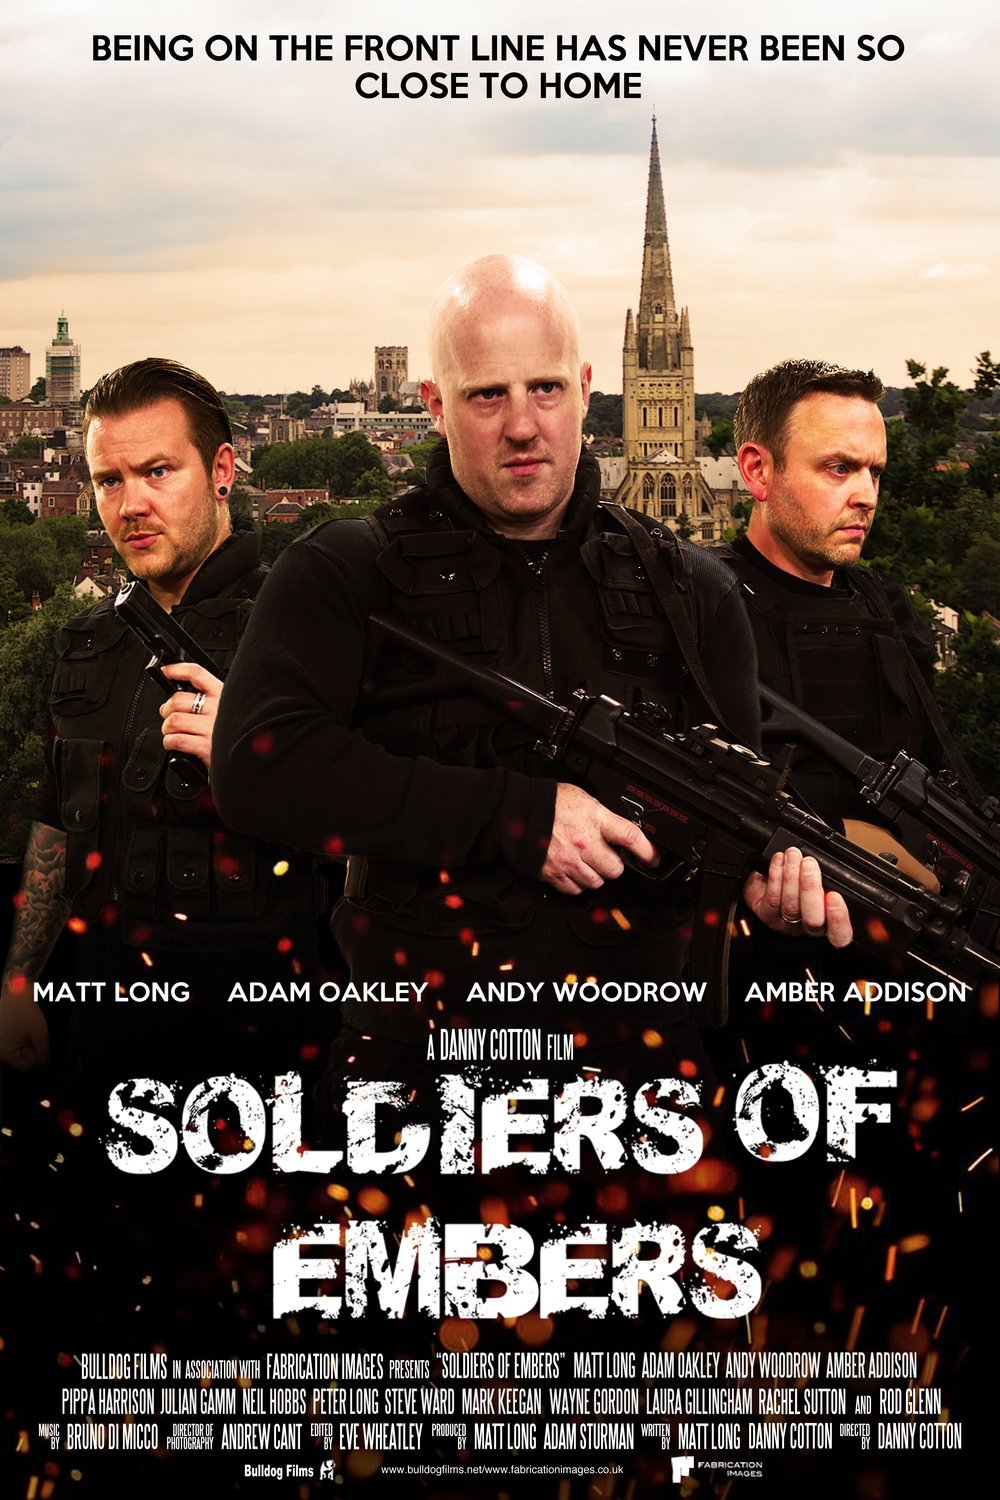 L'affiche du film Soldiers of Embers